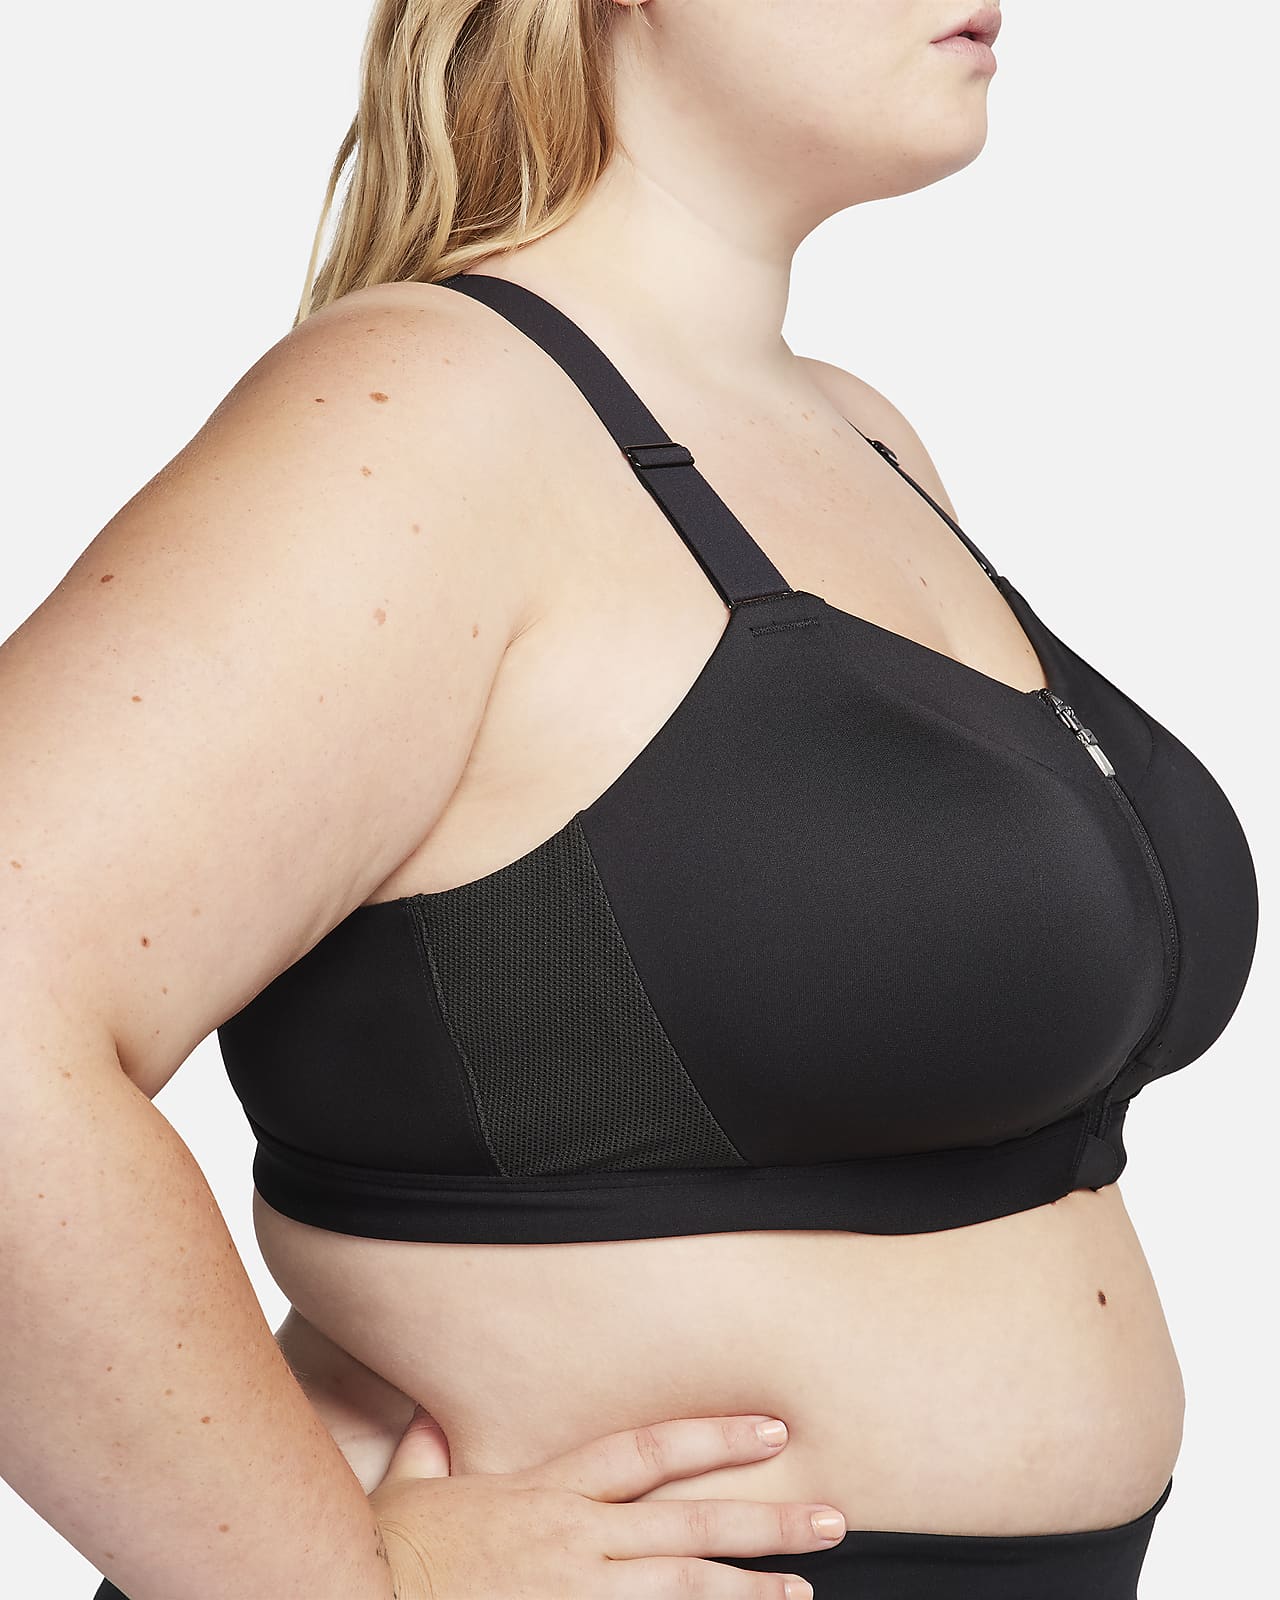 Nike Alpha Women's High-Support Padded Zip-Front Sports Bra.